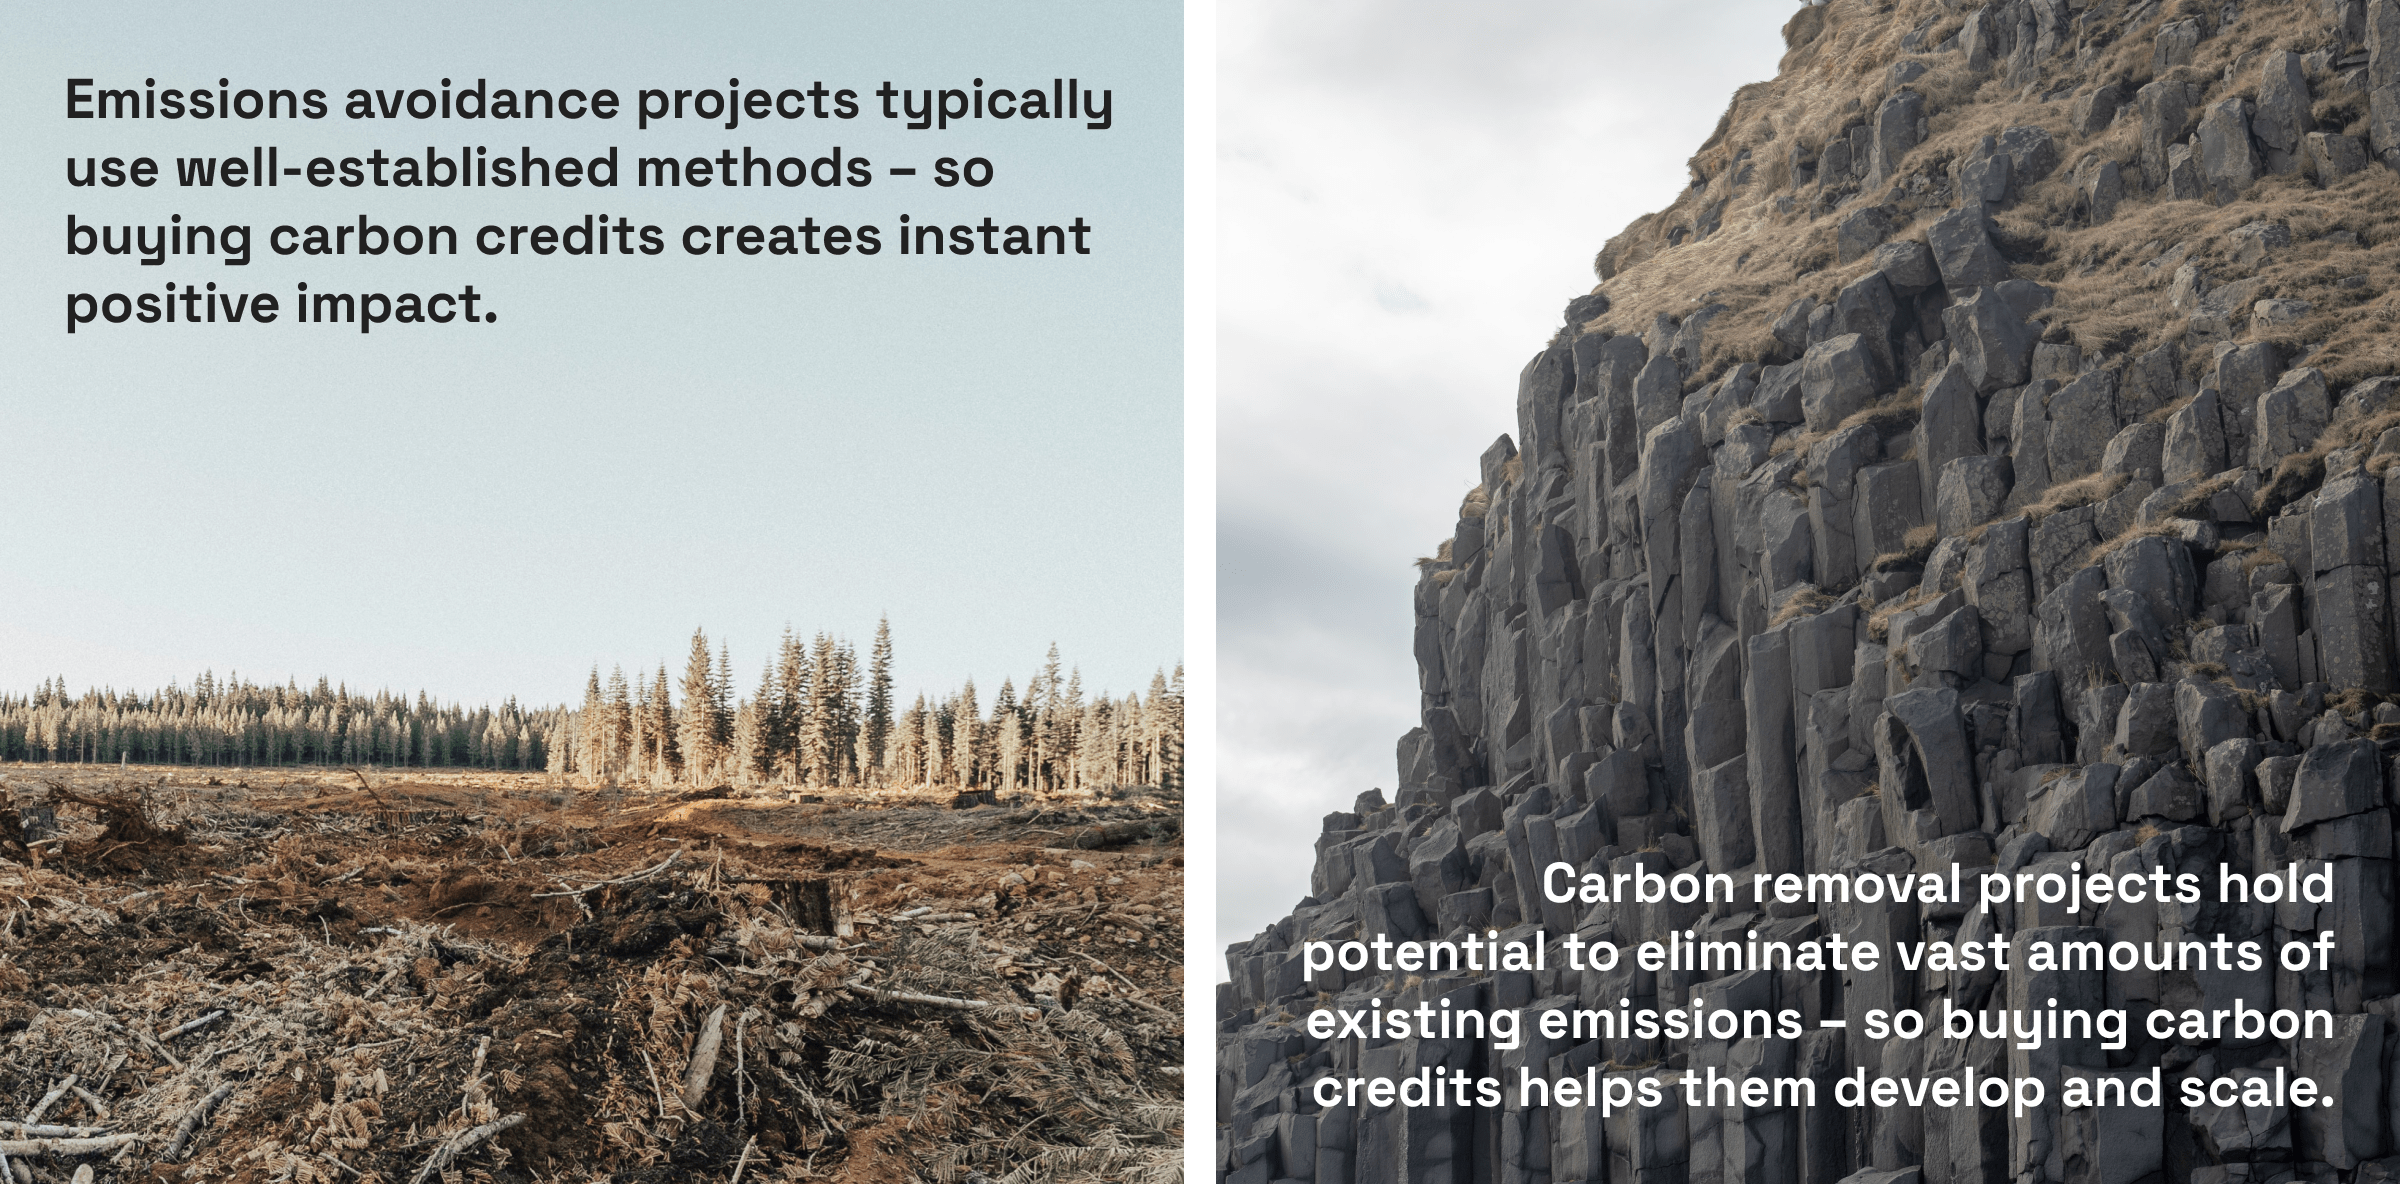 Emissions avoidance projects typically use well-established methods - so buying carbon credits creates instant positive impact. Carbon removal projects hold potential to eliminate vast amounts of existing emissions - so buying carbon credits helps them develop and scale.